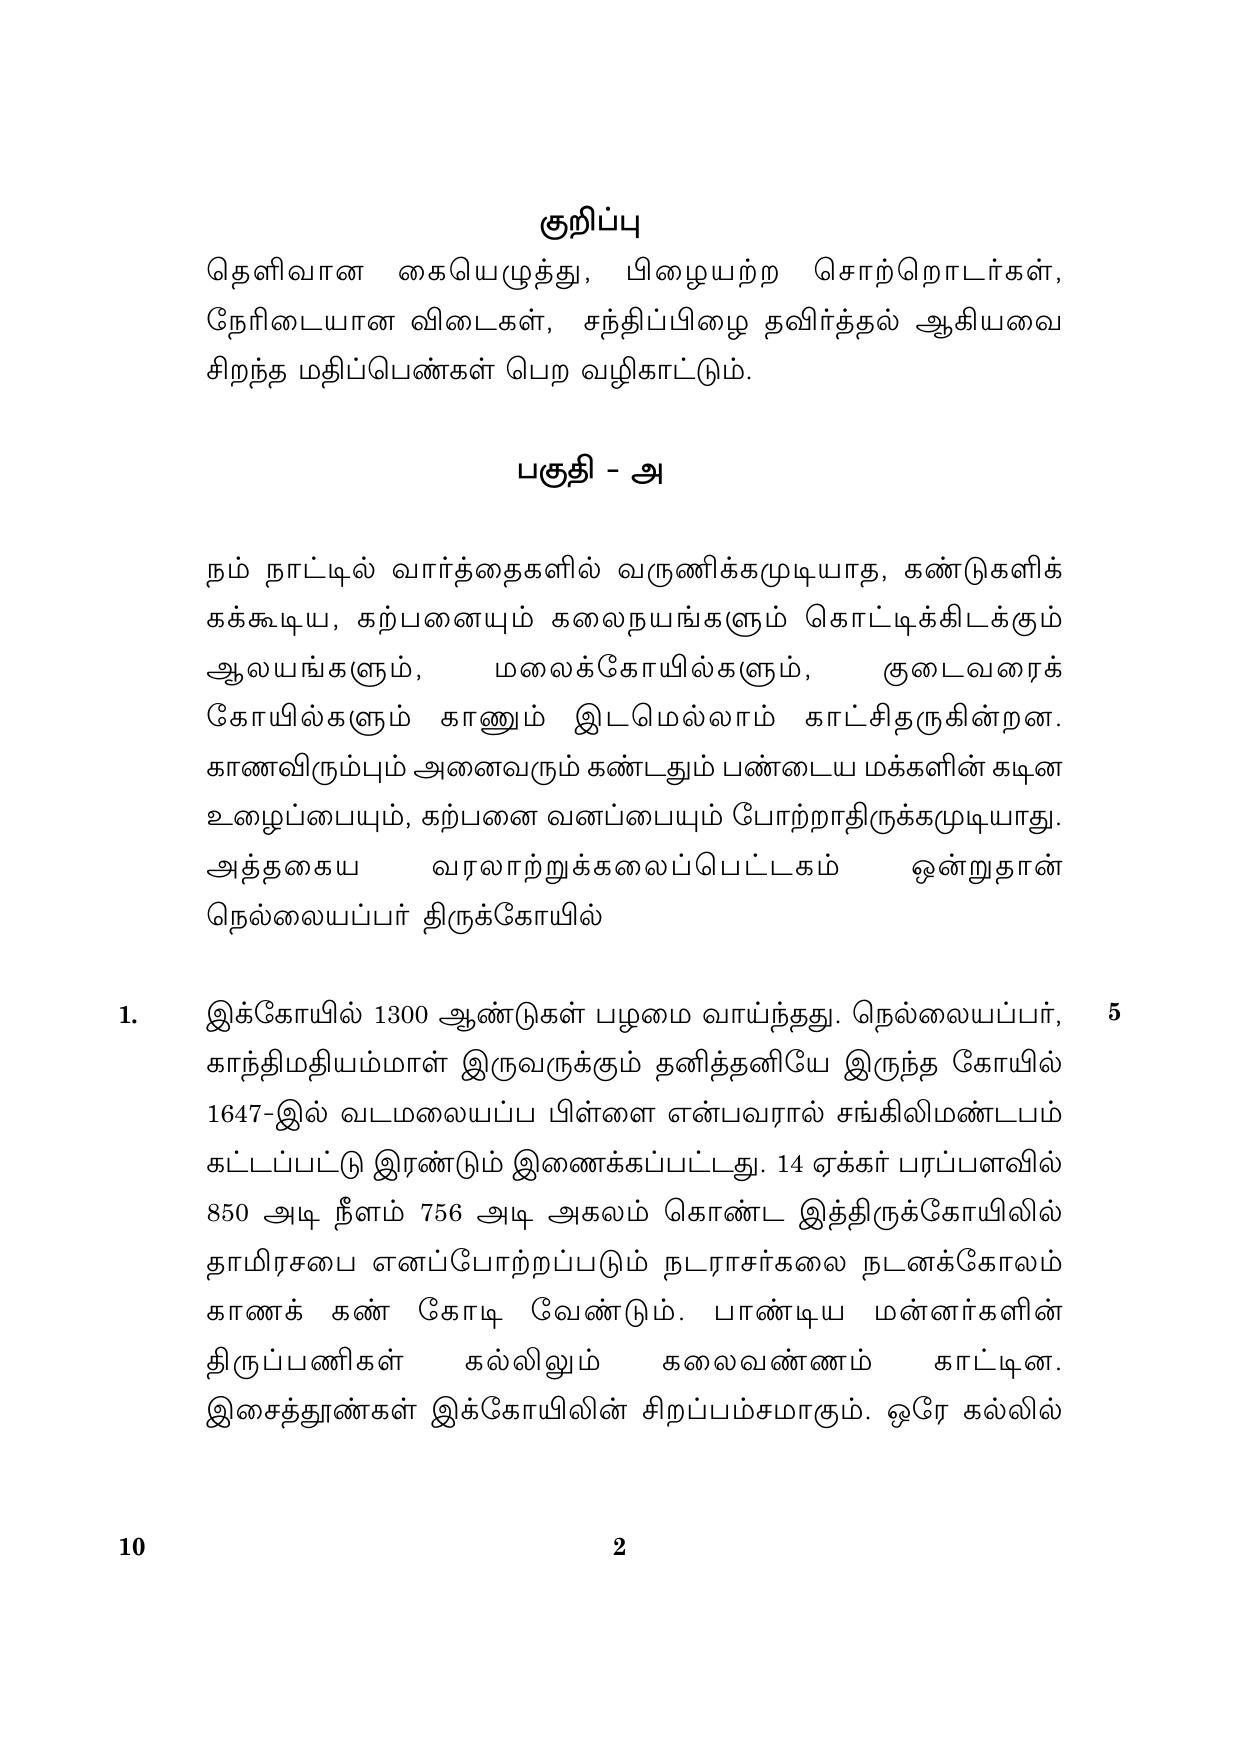 CBSE Class 10 010 Tamil 2016 Question Paper - Page 2